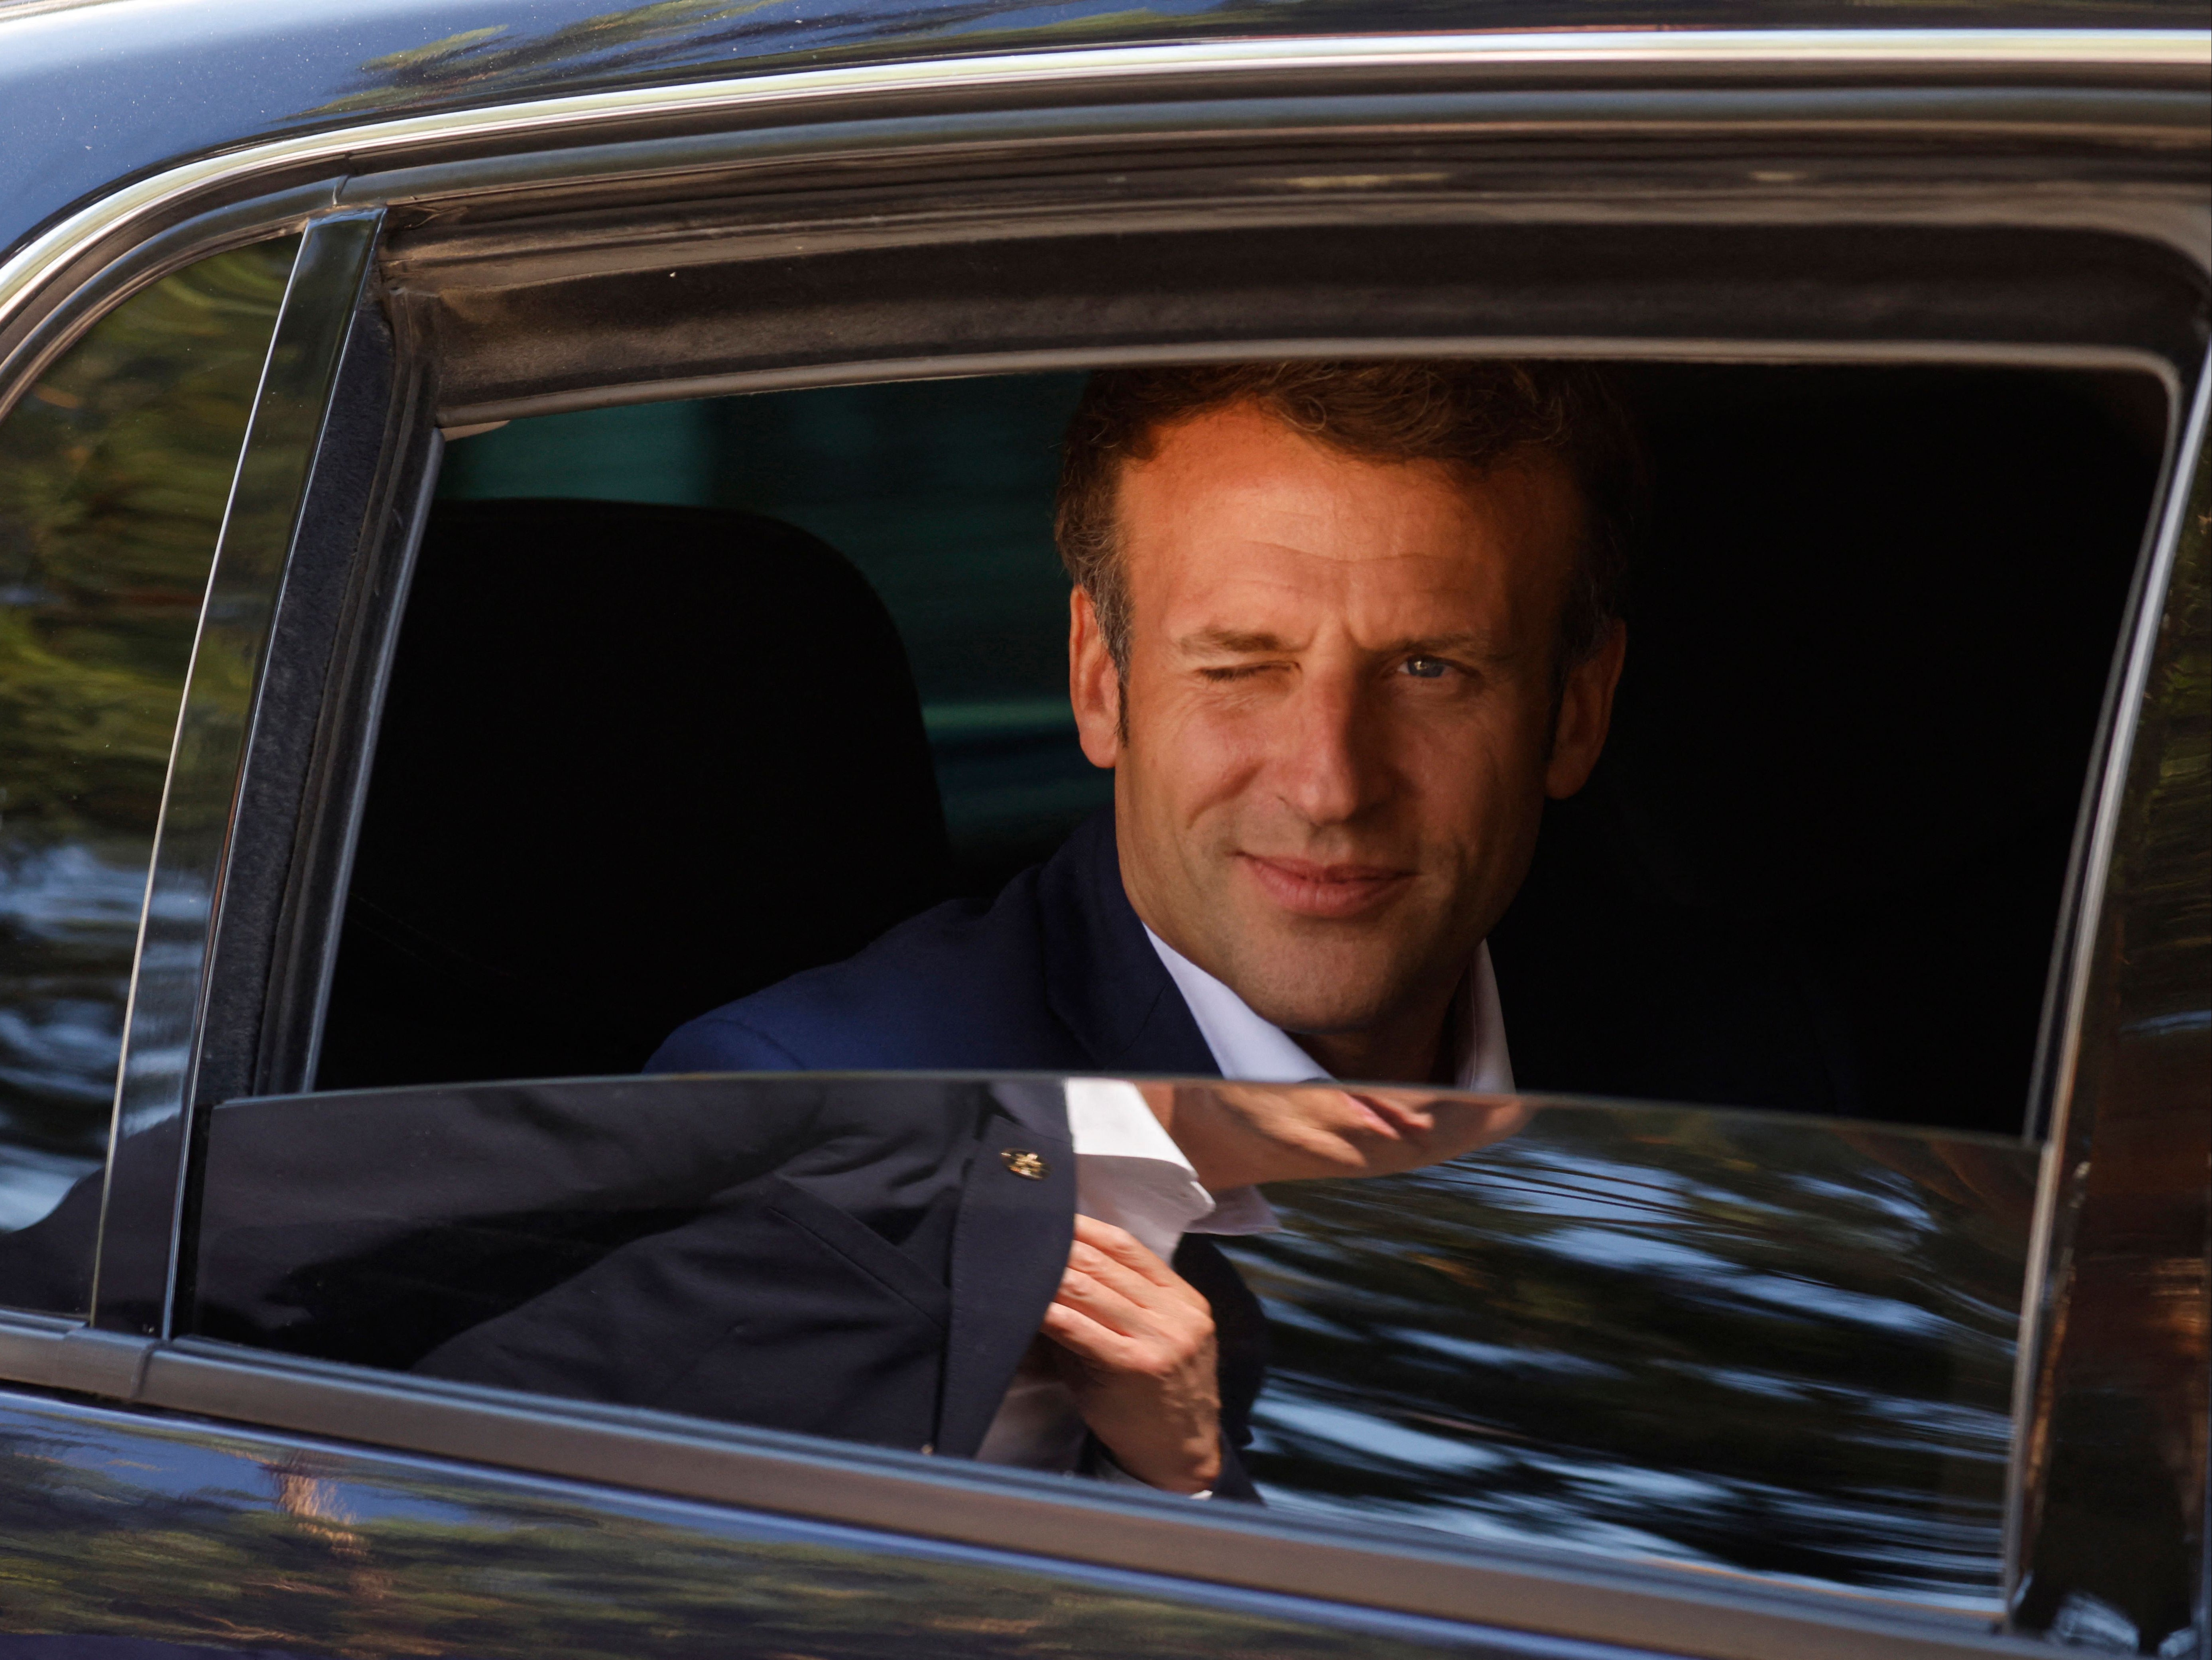 Macron leaves his family home in Le Touquet, after he voted in the first round of the French regional elections